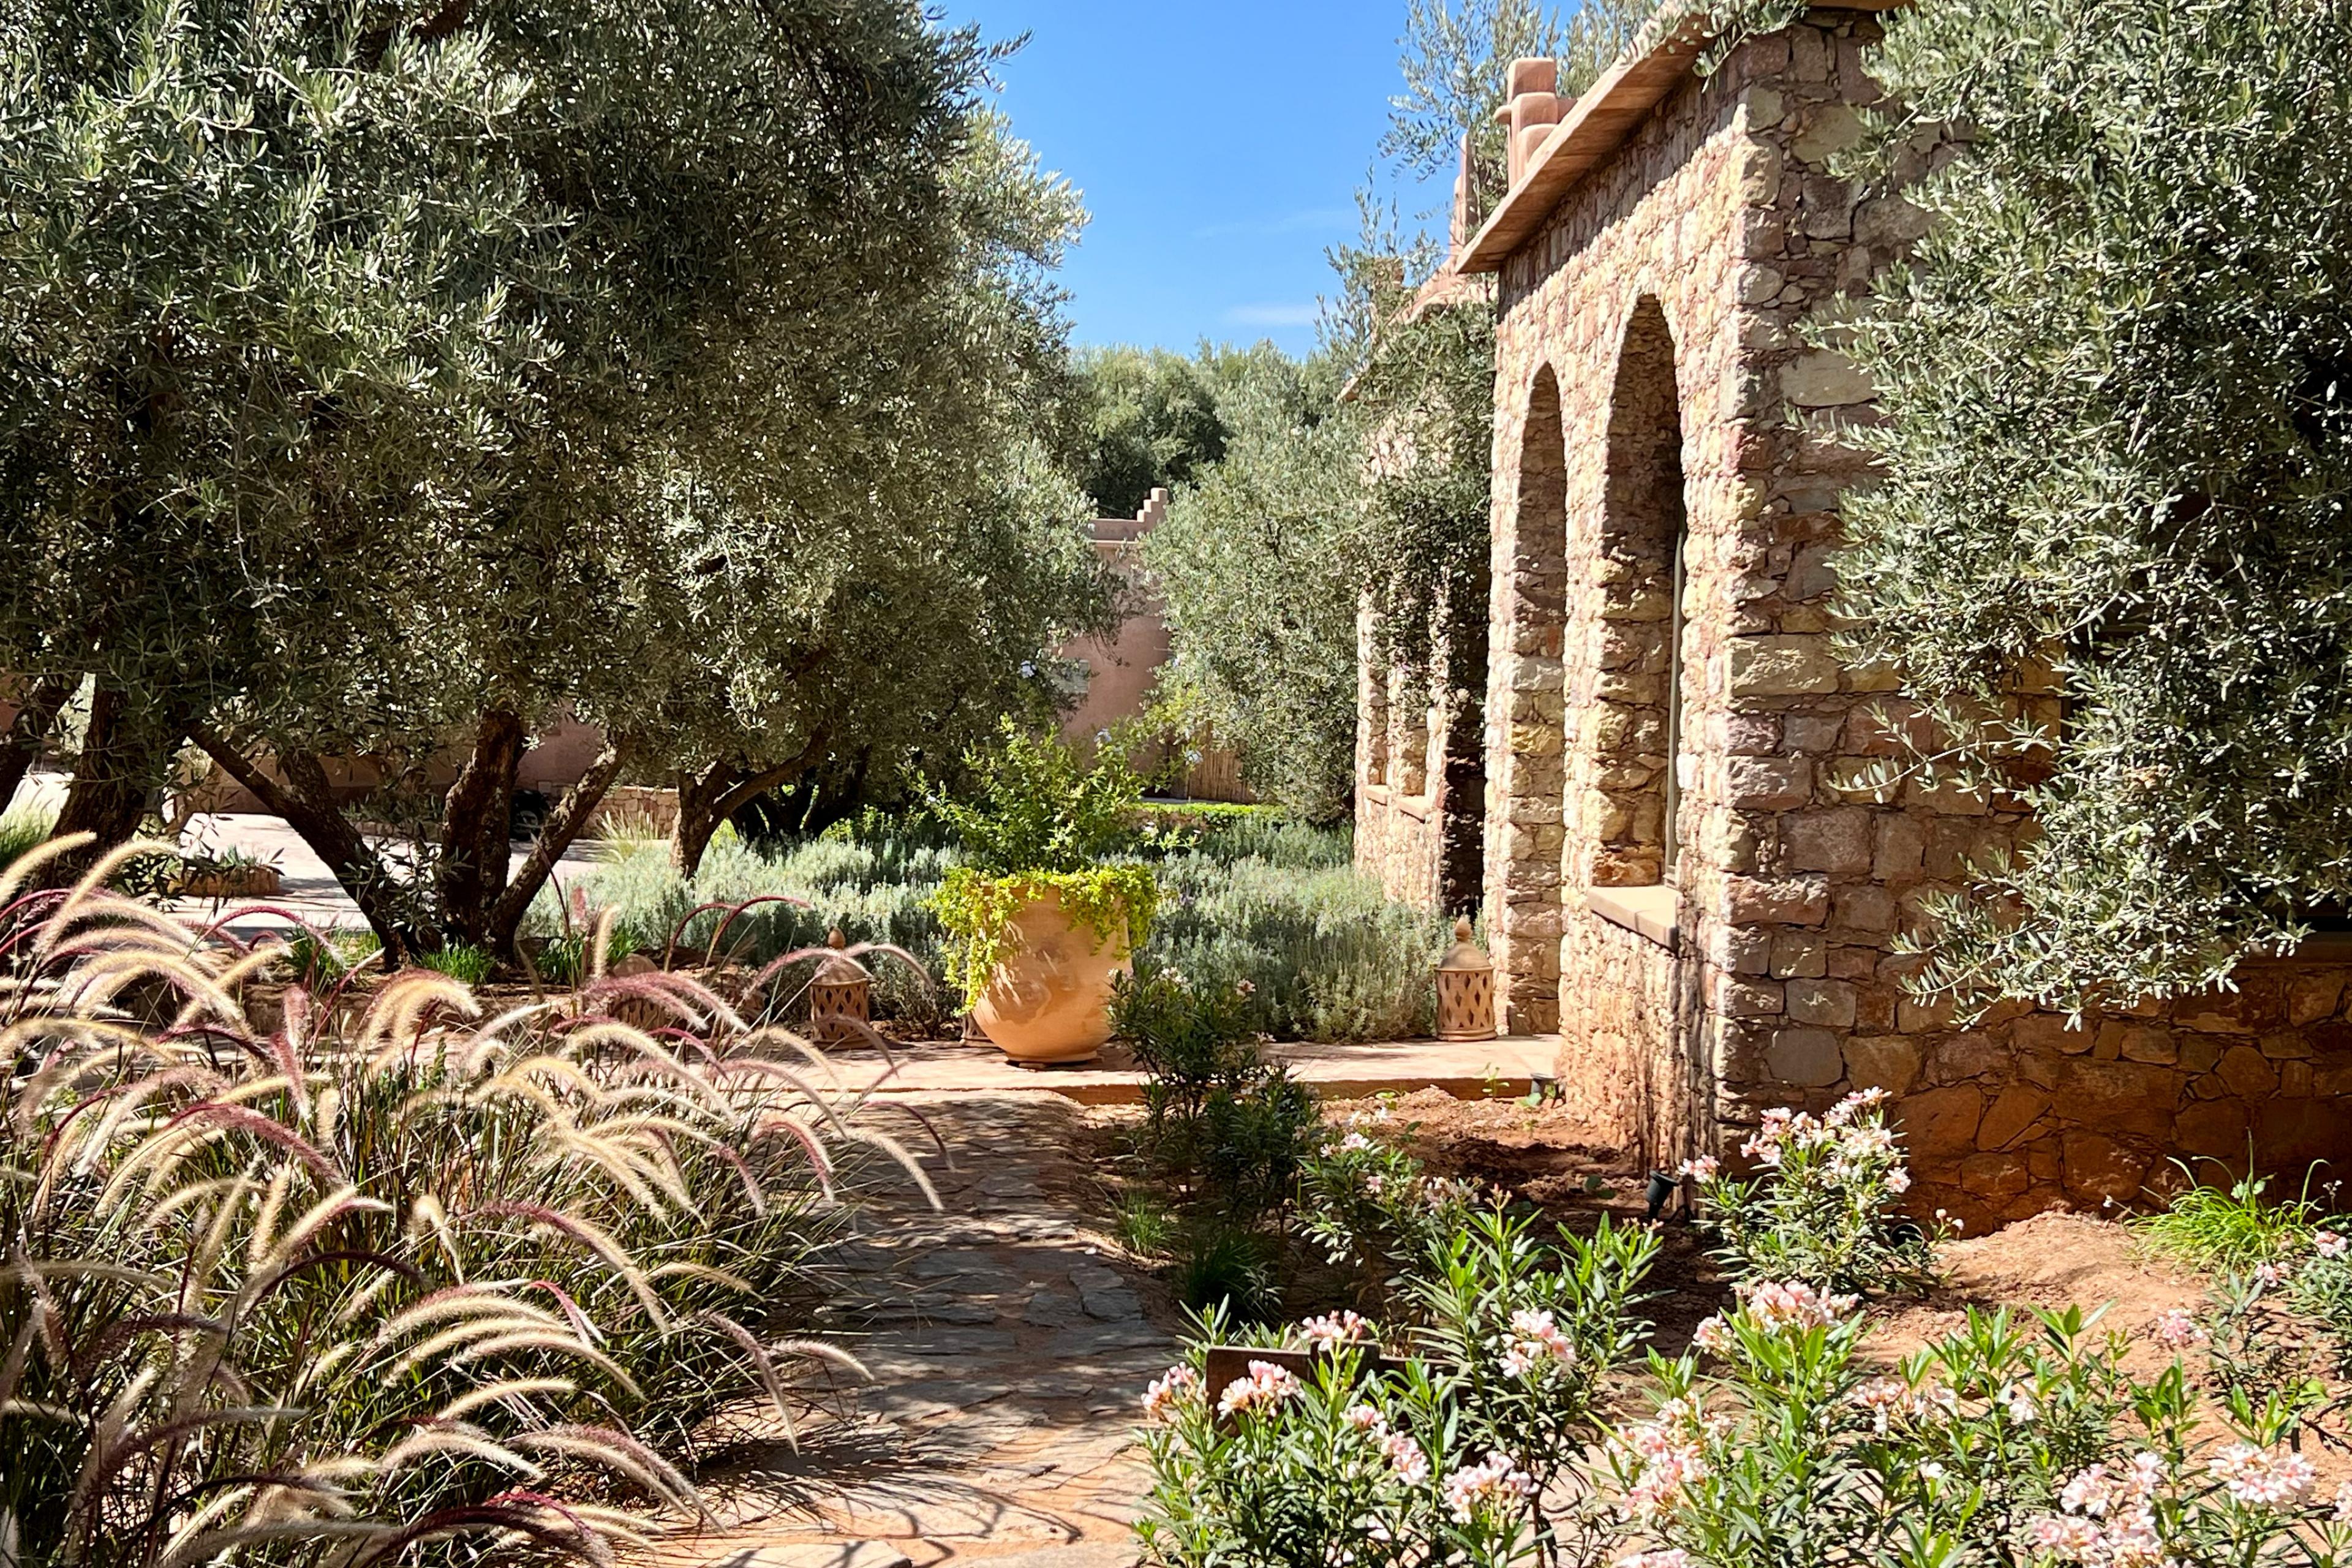 desert garden with stone arched walls